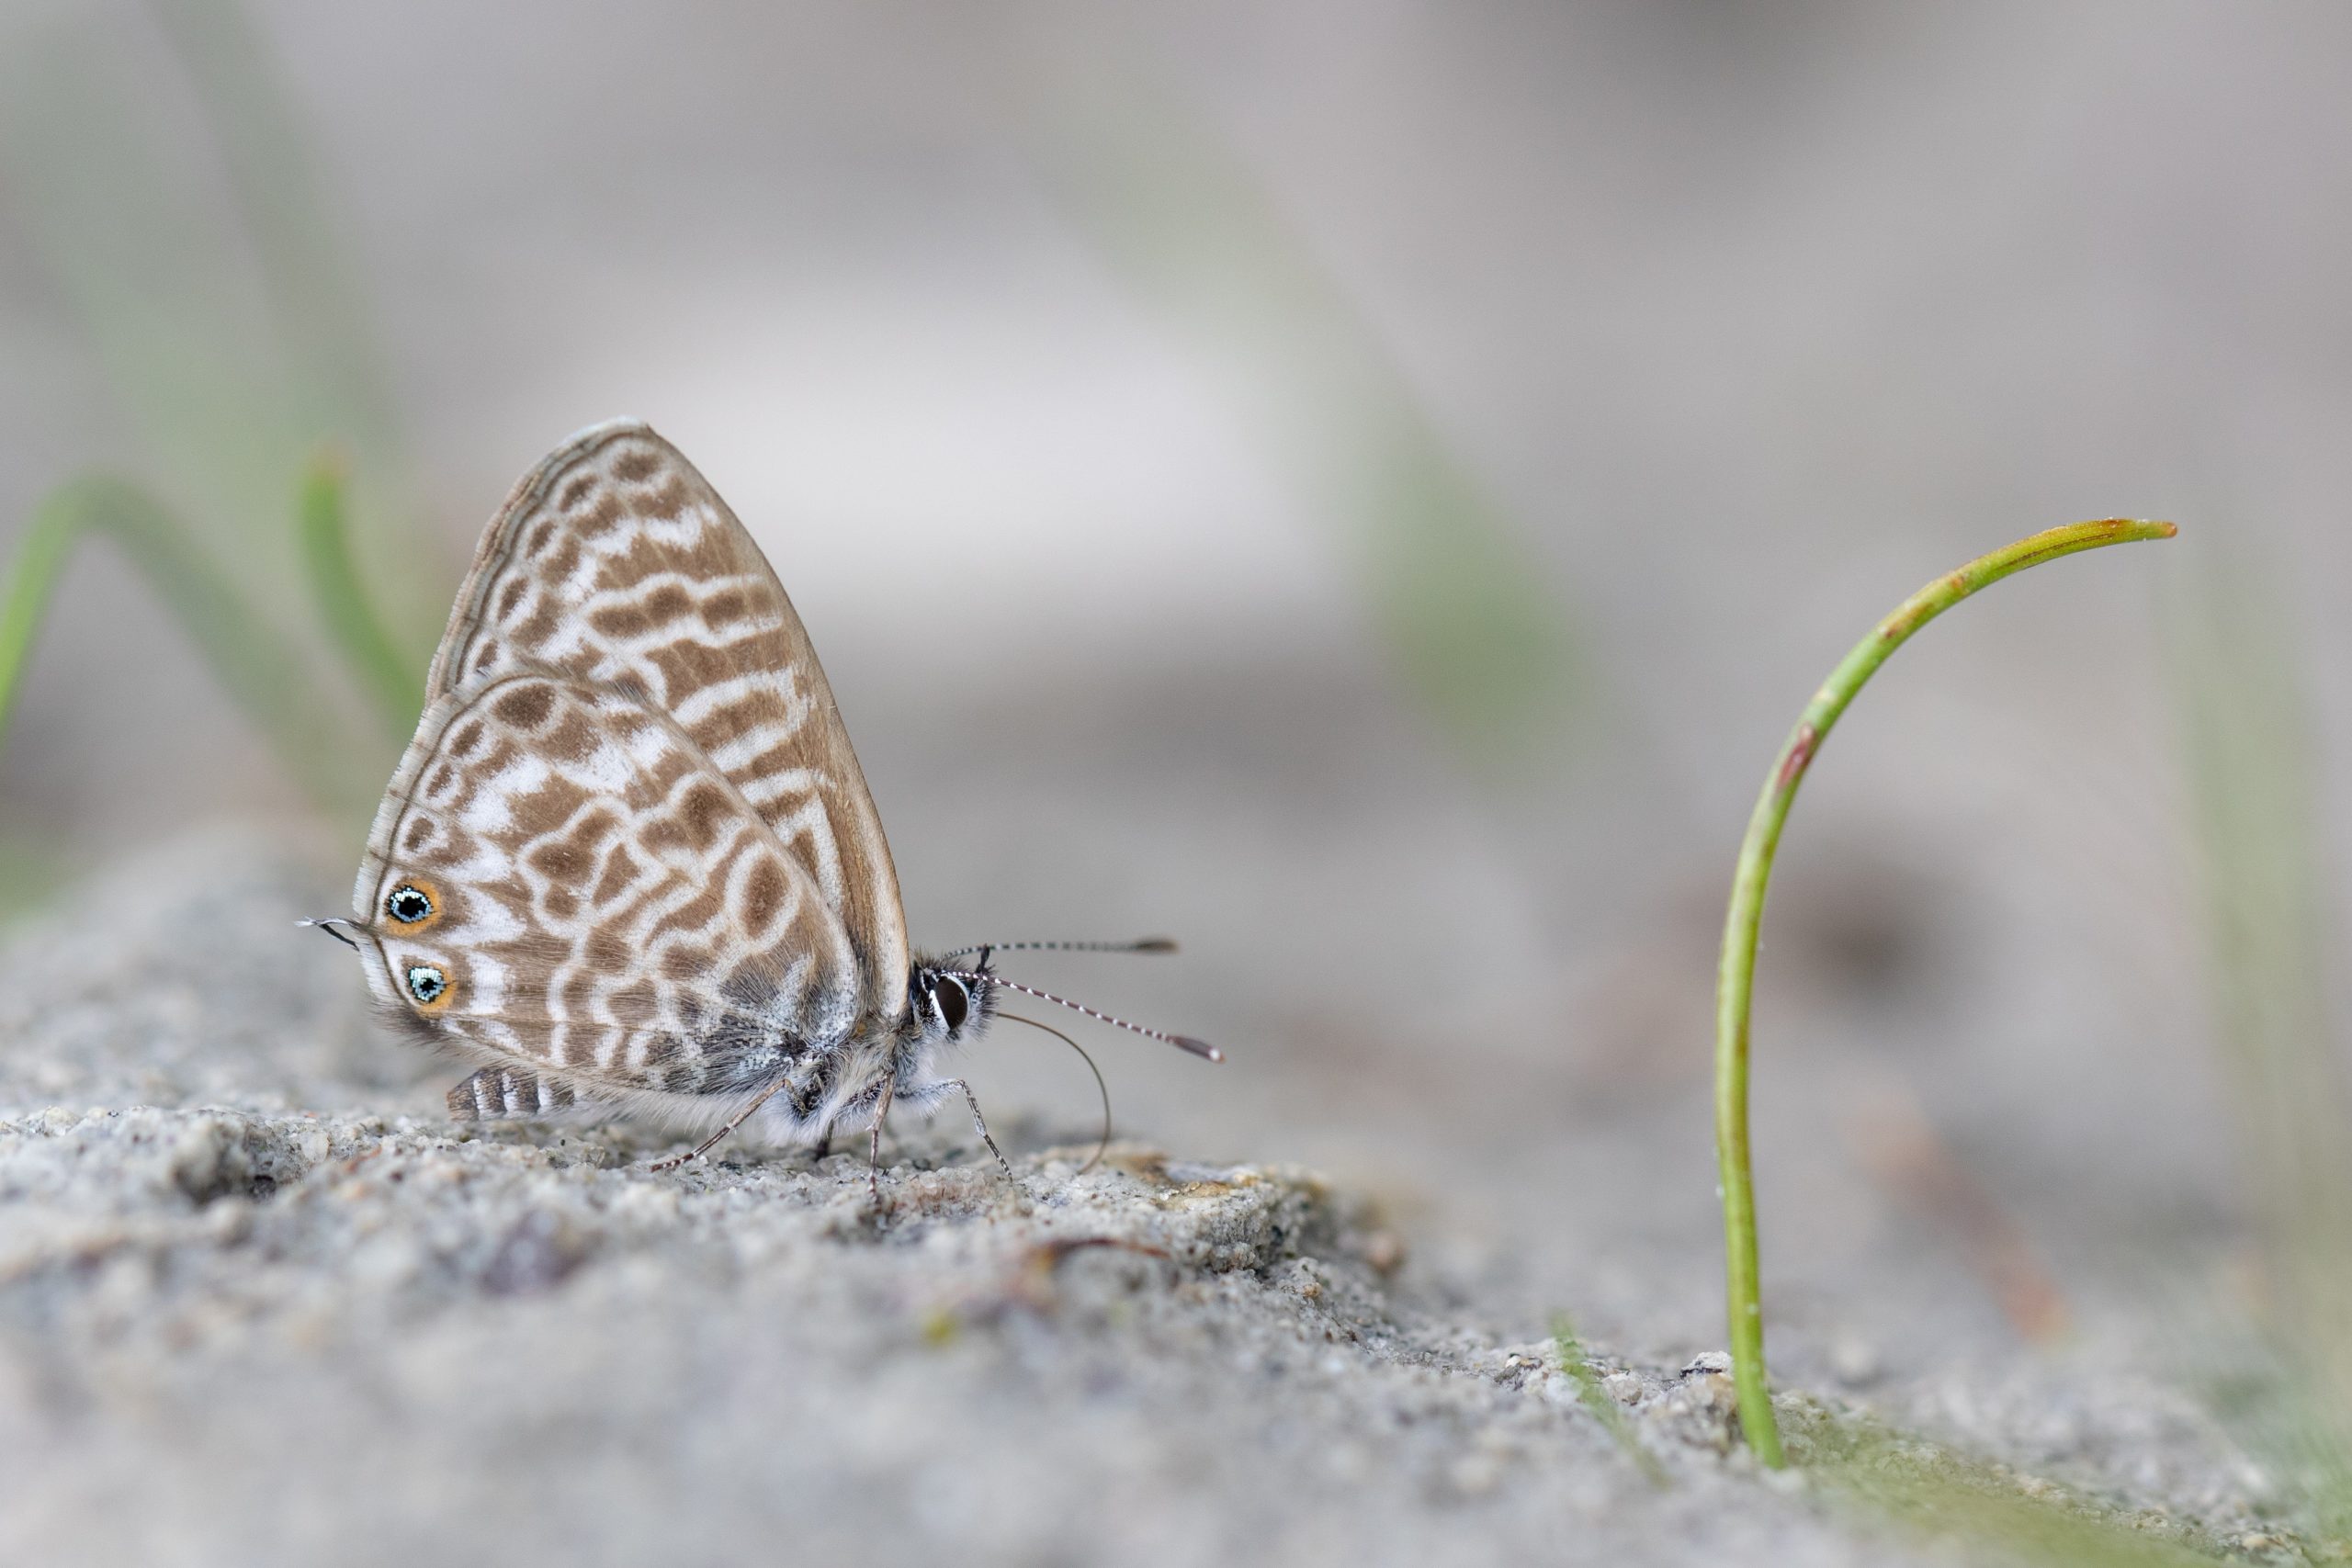 Lang's Short-tailed Blue butterfly, Leptotes pirithous, on sandy soil